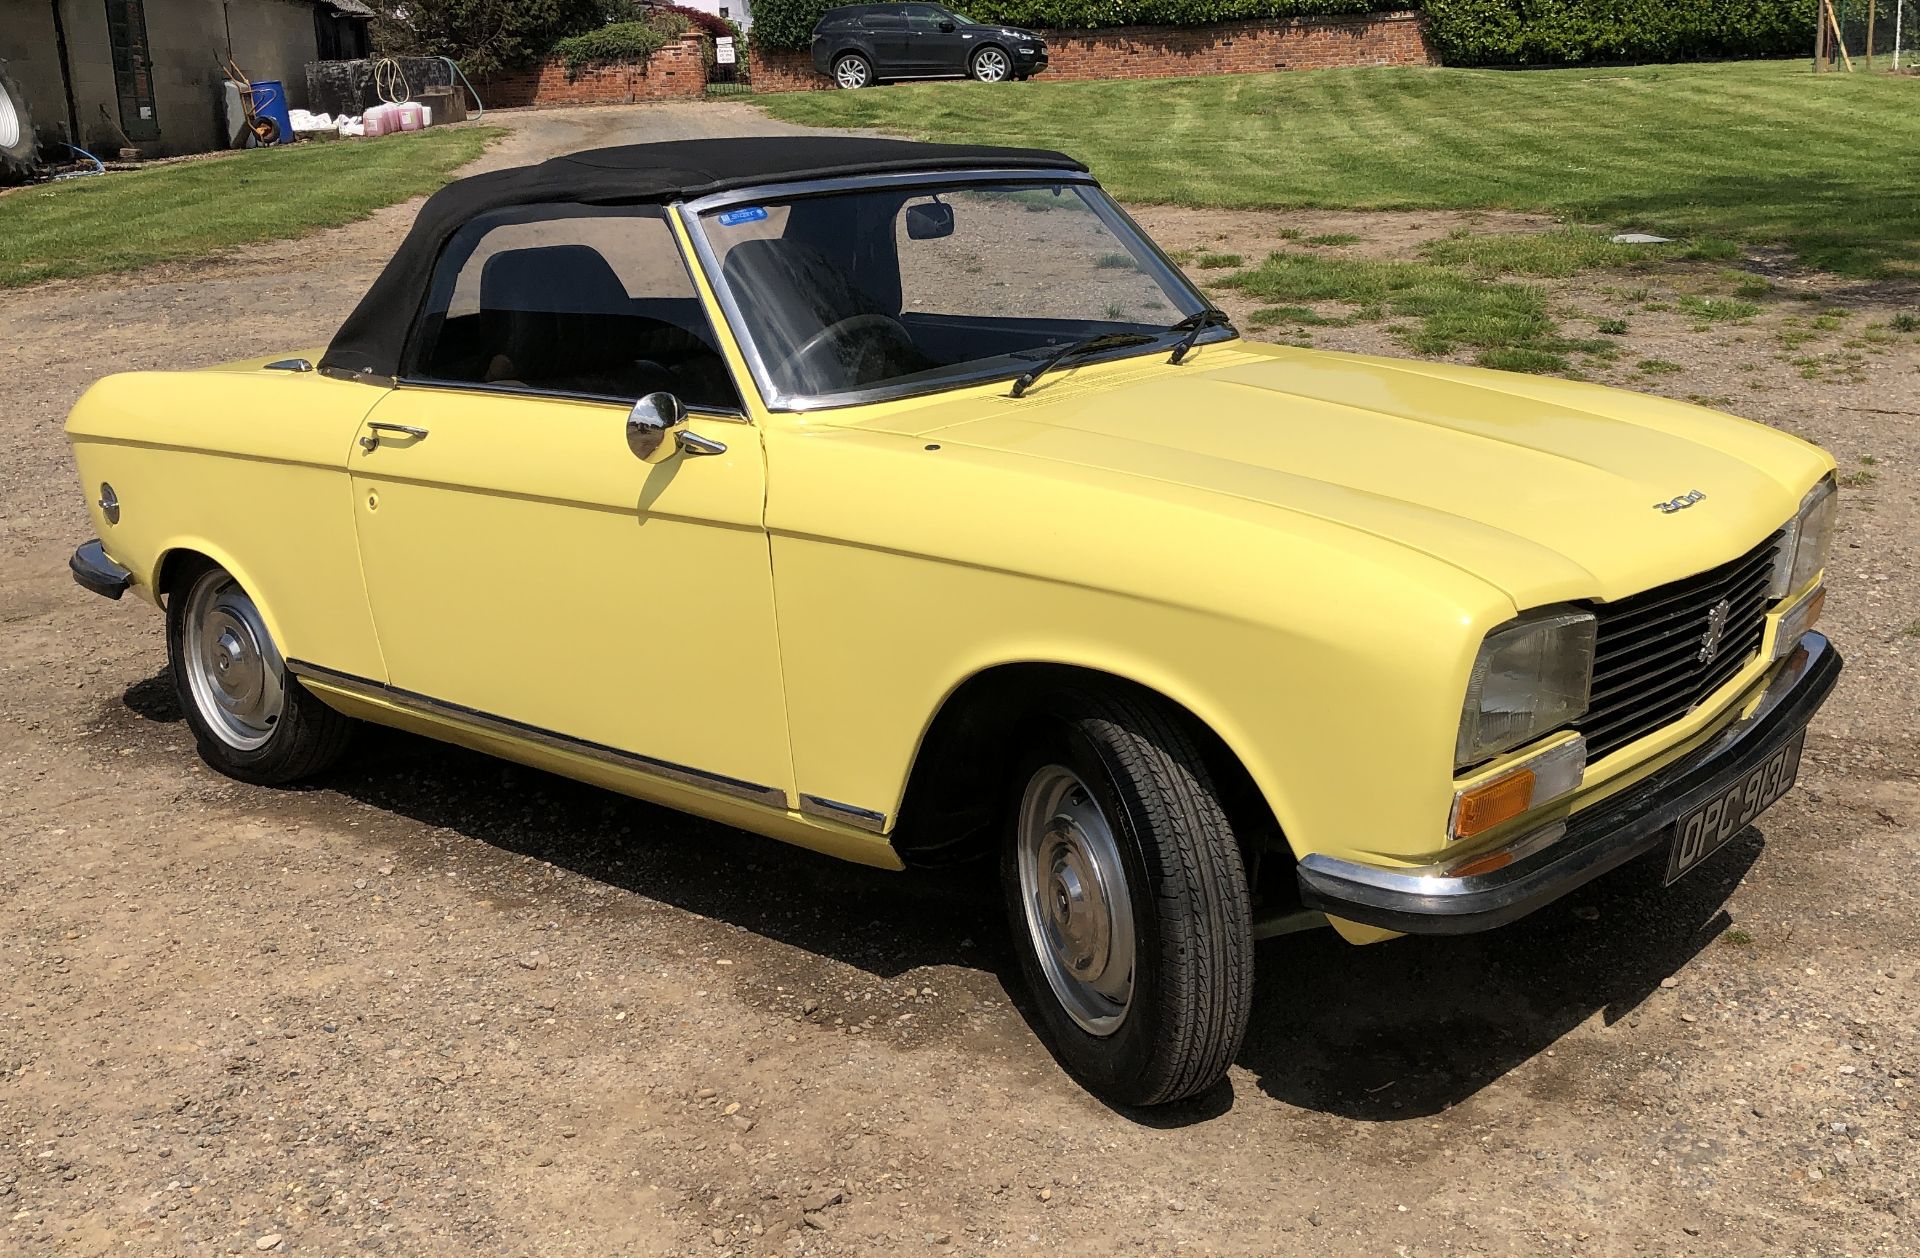 Rare Right Hand Drive Peugeot 304 Convertible, Registration OPC 913L, First Registered 2nd